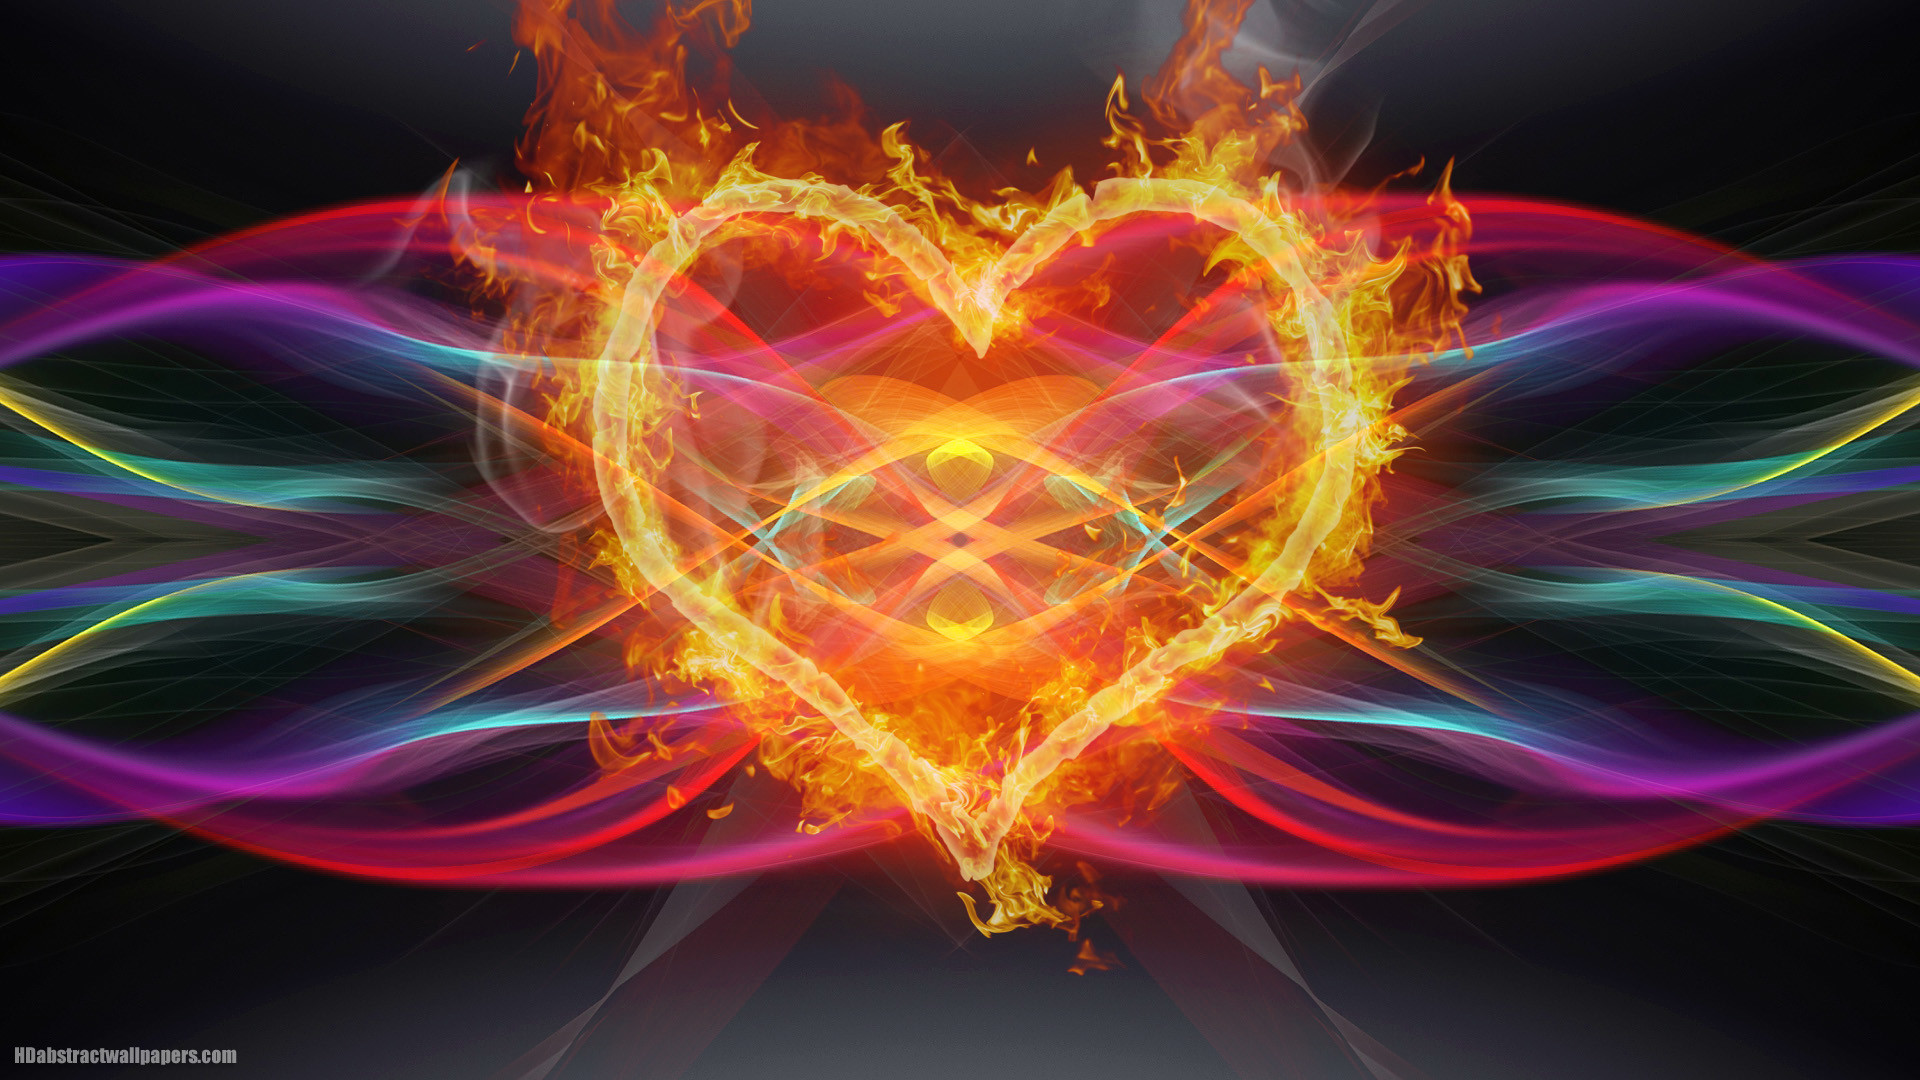 1920x1080 Colorful abstract background with lines and love heart of fire. Very  beautiful abstract wallpaper with fire.